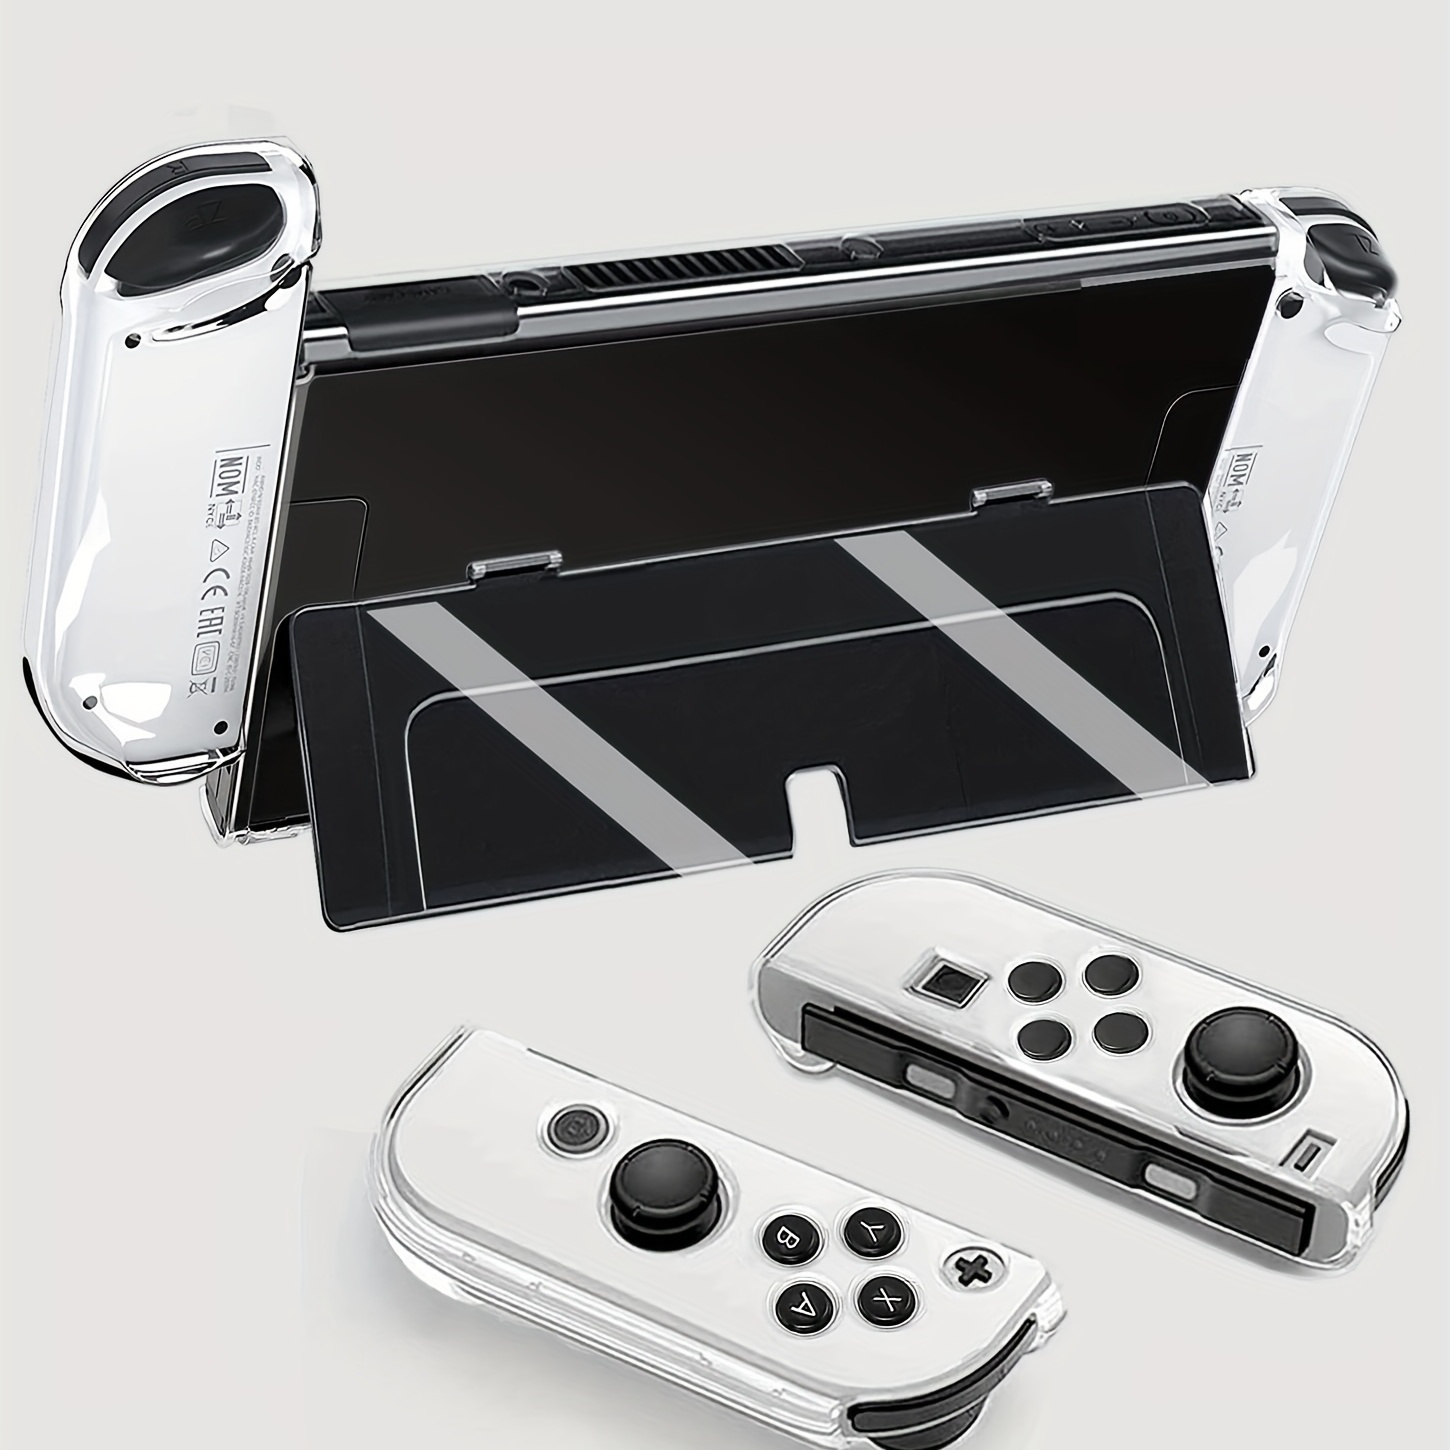 GeekShare Christmas Switch OLED Case, Hard PC Protective Case for Nintendo  Switch OLED and Joy Con 